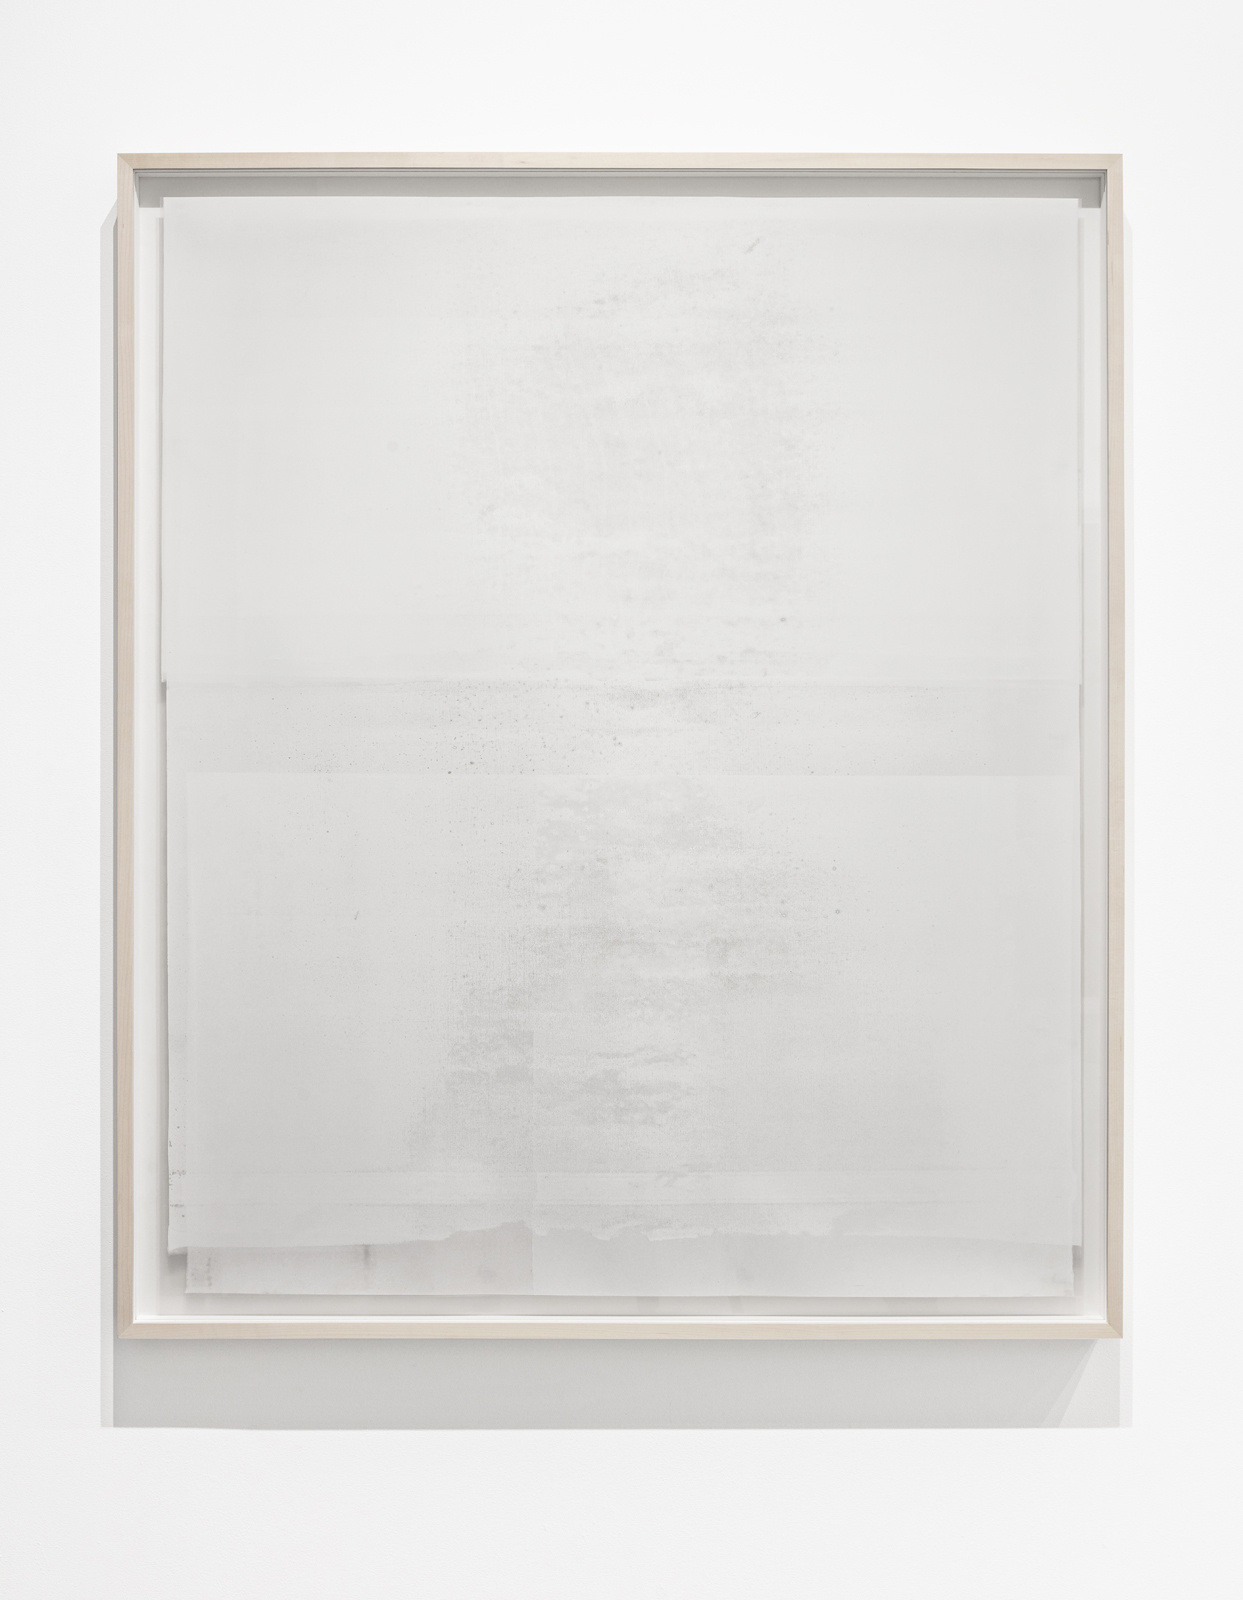   Untitled  ( white (square)  from the series  Impermanent Horizon ), 2016, 2 layers, oil based paint (white) on clouded mylar hinged on plexi set in front of acrylic (light grey) on mylar, 46 x 39 inches&nbsp; 